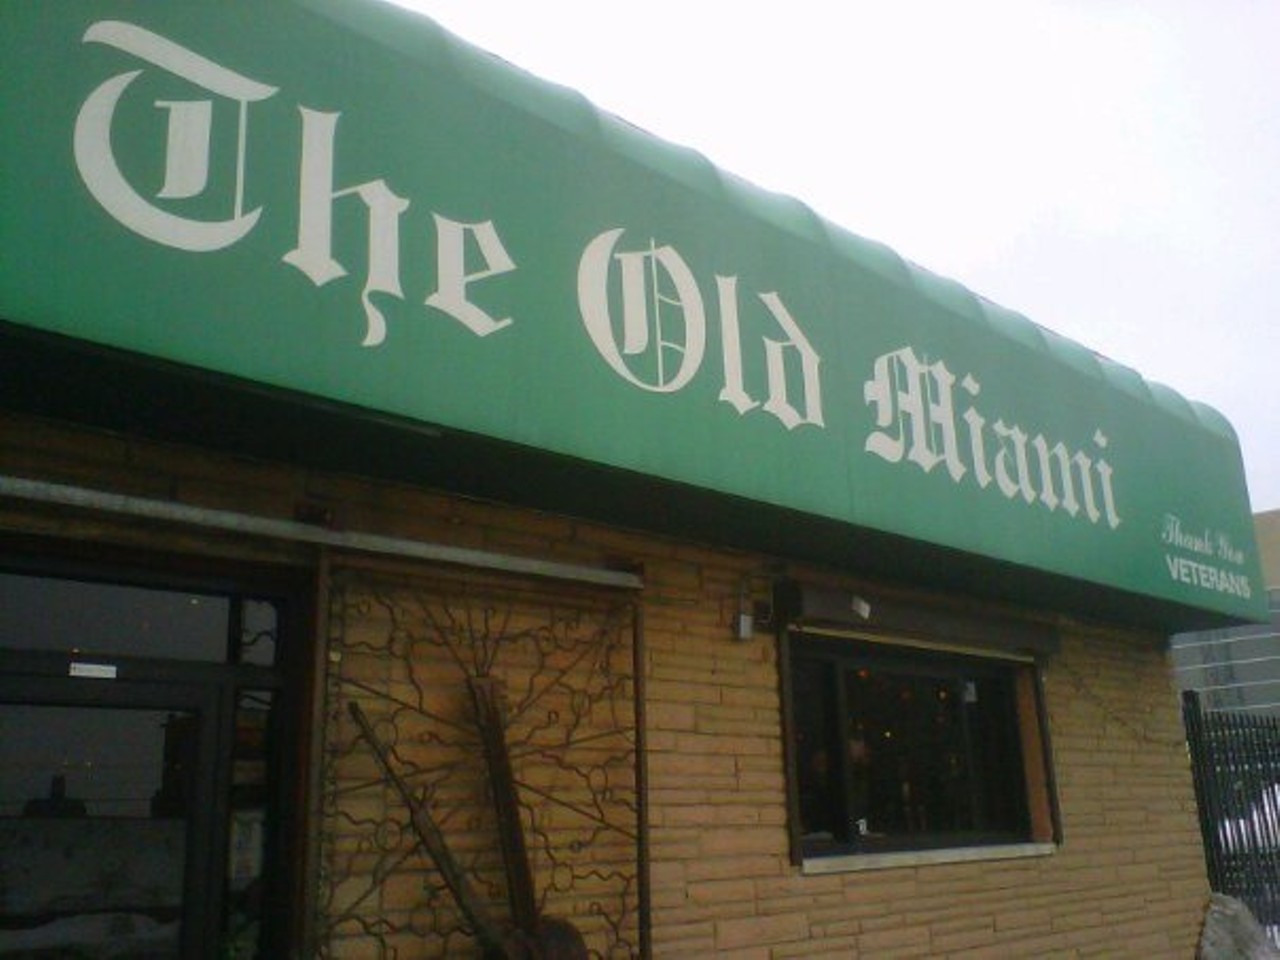 The Old Miami
3930 Cass Ave., Detroit; 313-831-3830; facebook.com/theoldmiami
This longstanding Cass Corridor veteran's bar (Miami stands for "Missing in Action Michigan") is known by Detroiters as a low-key, no-frills hangout where you can kickback. While weekends can guarantee an unwanted run-in with an old friend, weekdays at the Old Miami are relatively quiet with so many cozy hiding spots to sink your introvert-ass into. Not to mention, a huge, manicured patio space perfectly suited for the introvert looking to disappear.
Photo via The Old Miami / Facebook